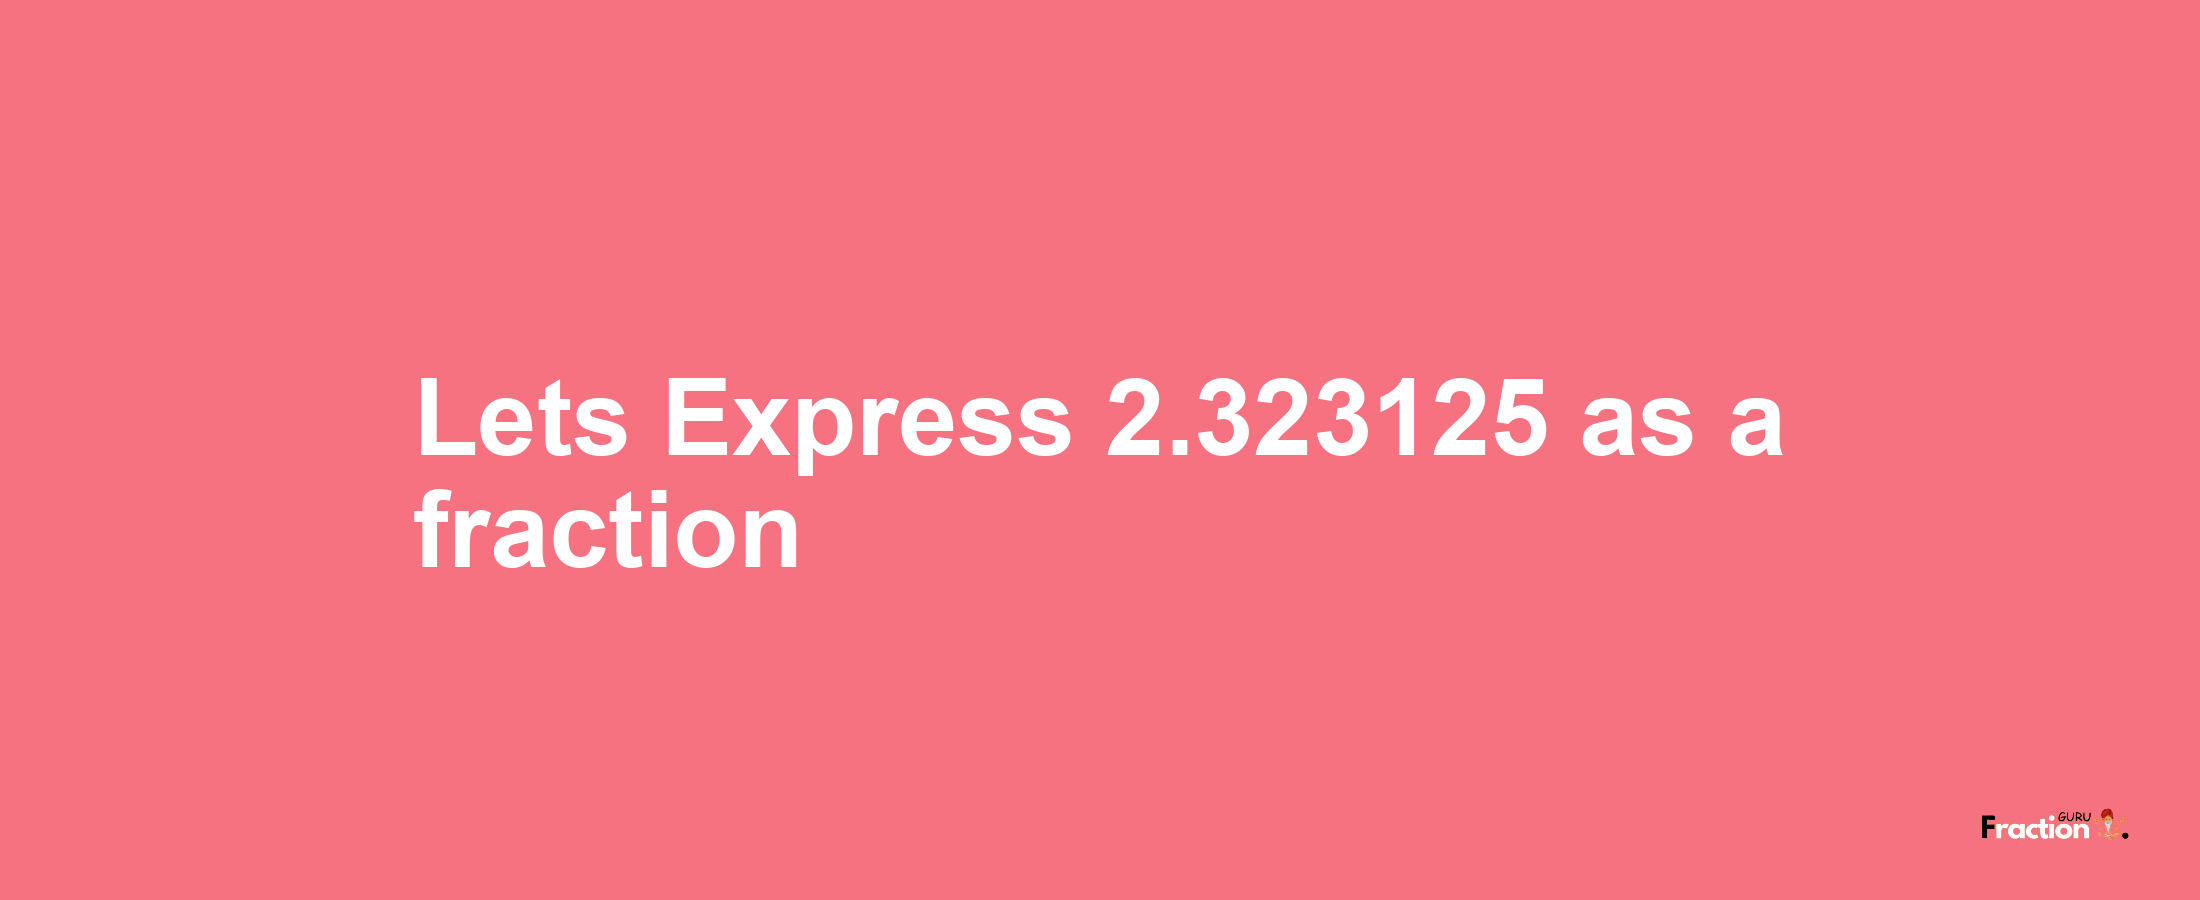 Lets Express 2.323125 as afraction